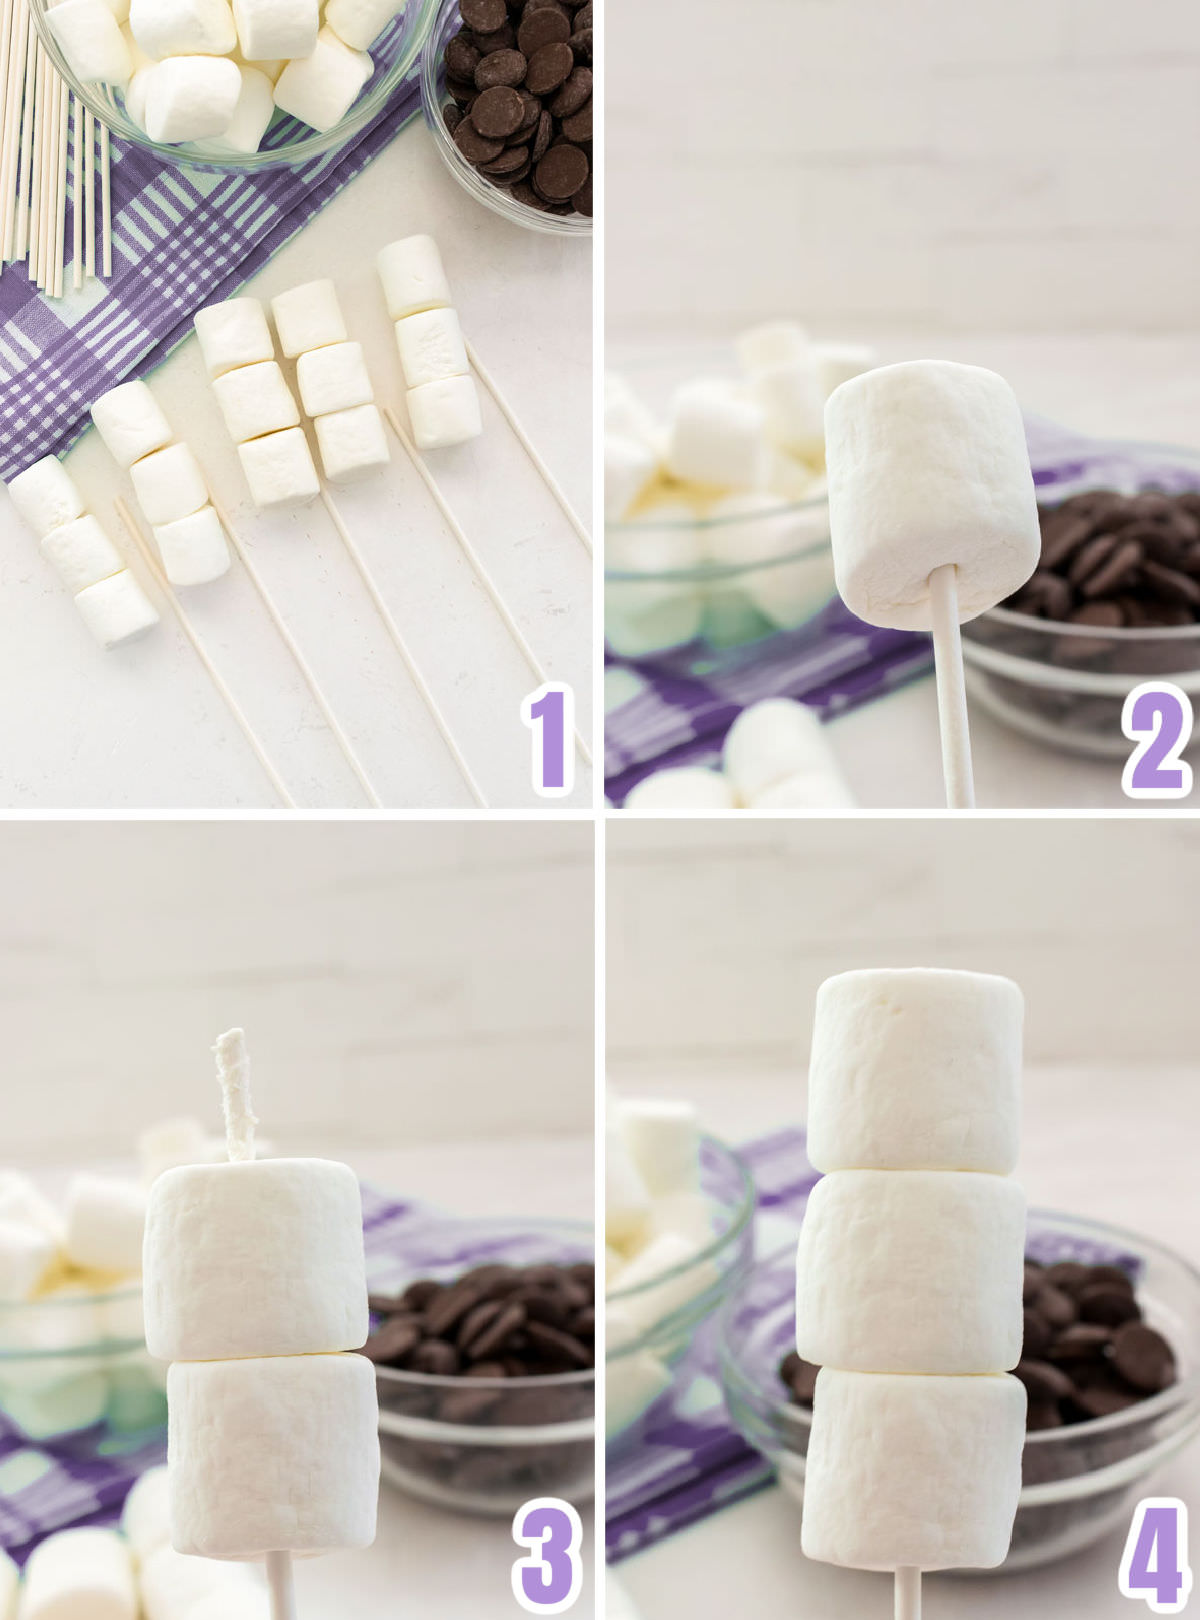 Collage image showing how to place the marshmallows on the lollipop stick.